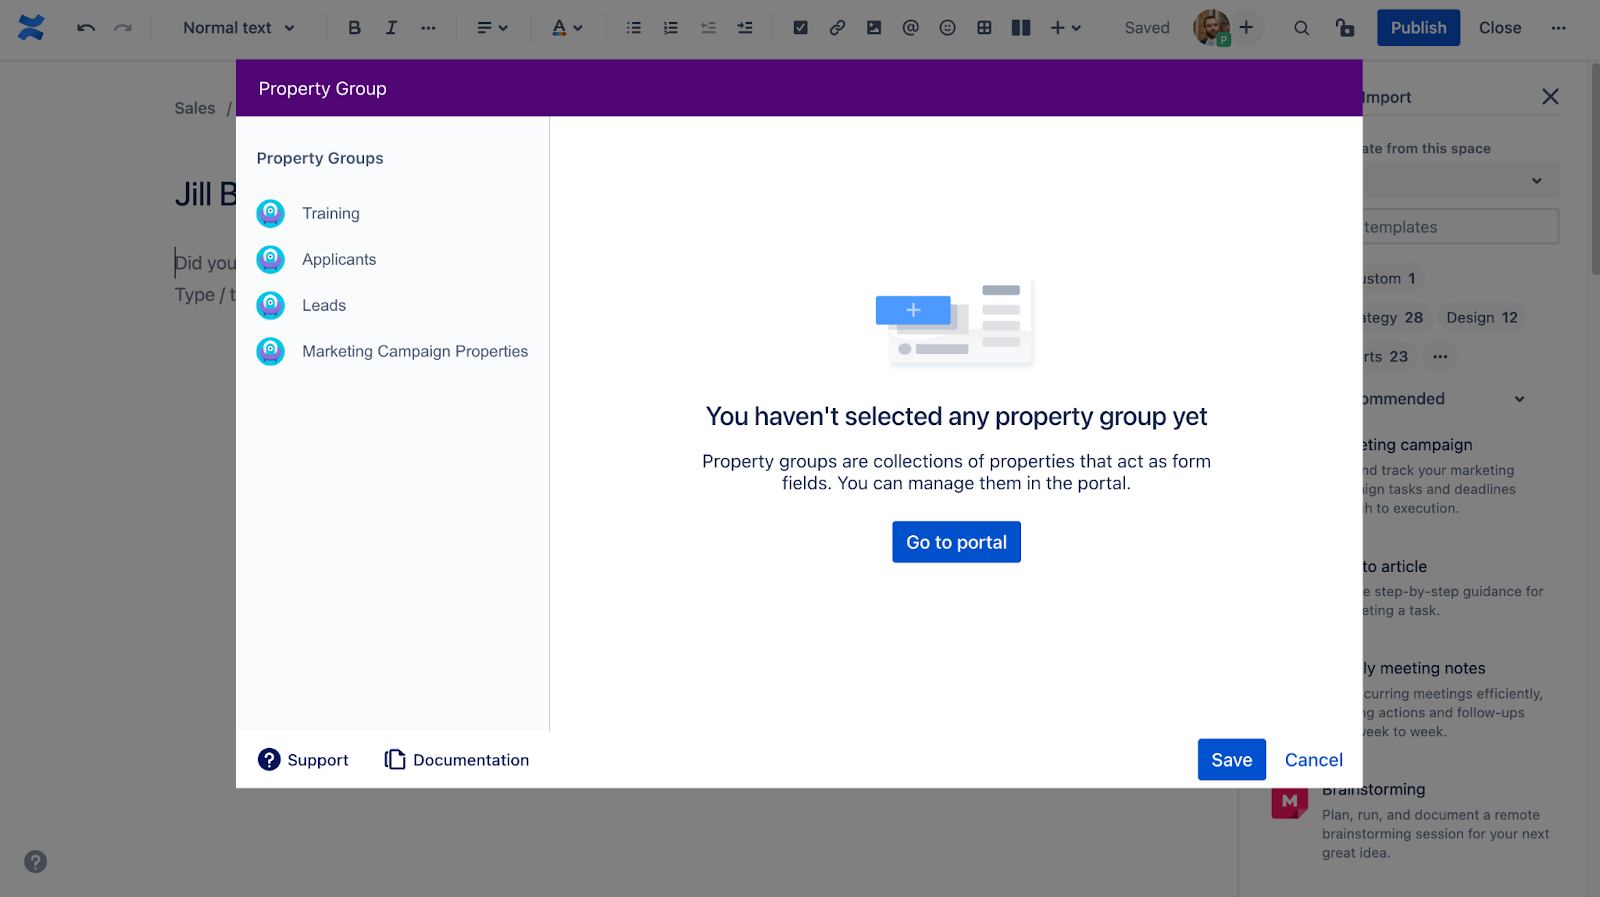 Document your leads from the first contact in Confluence Cloud - image showing first screen that pops up when adding a property group macro including the go to portal button